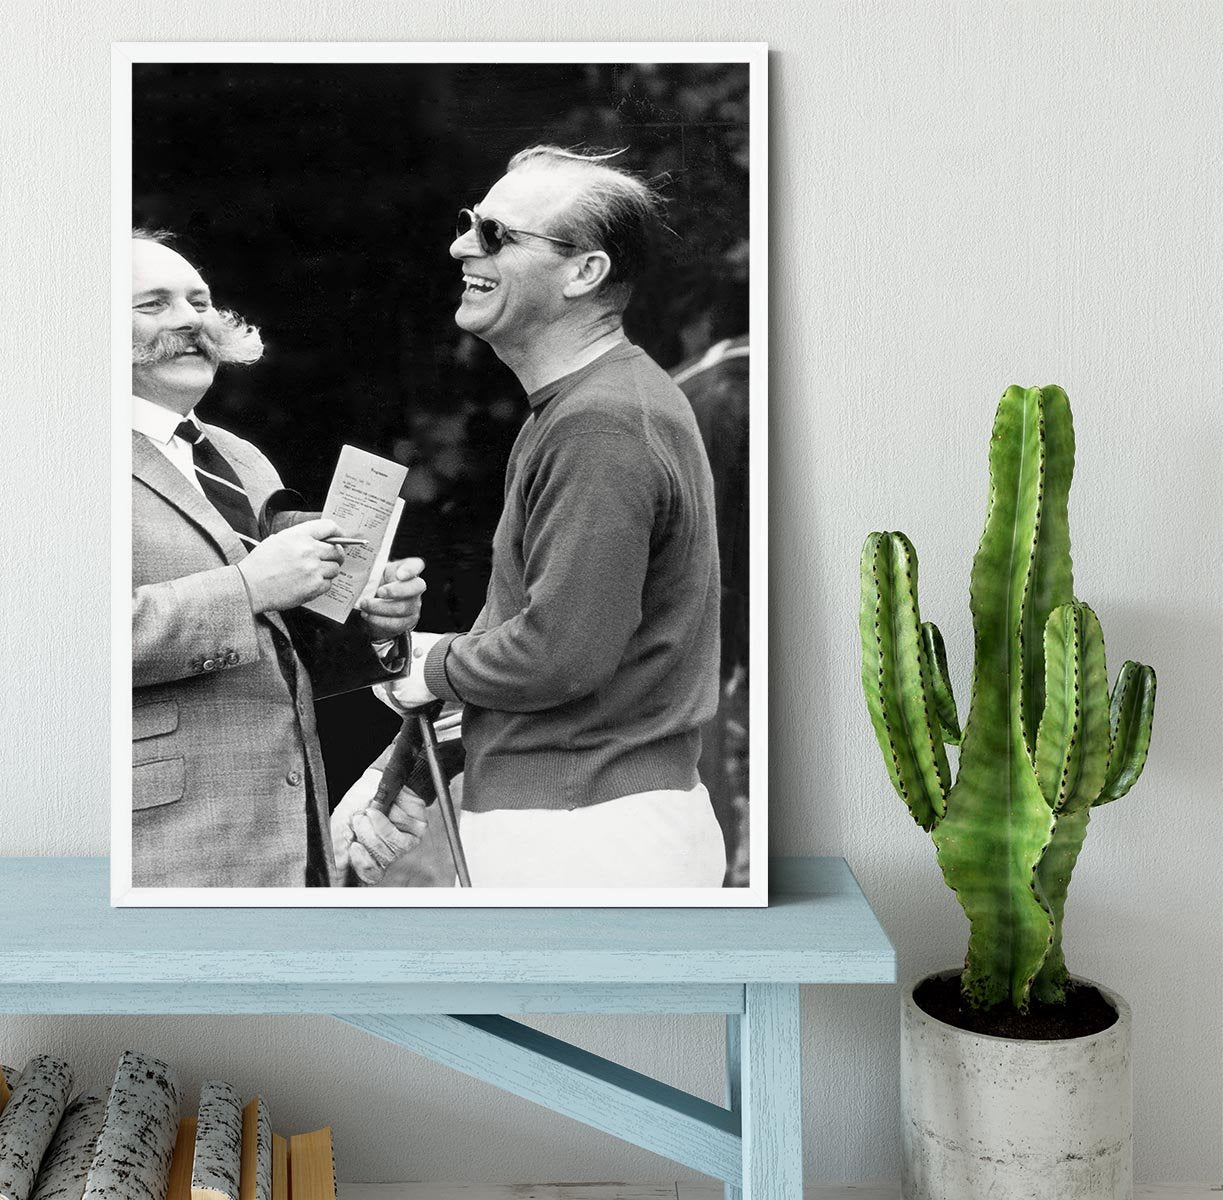 Prince Philip chatting with the comedian Jimmy Edwards Framed Print - Canvas Art Rocks -6